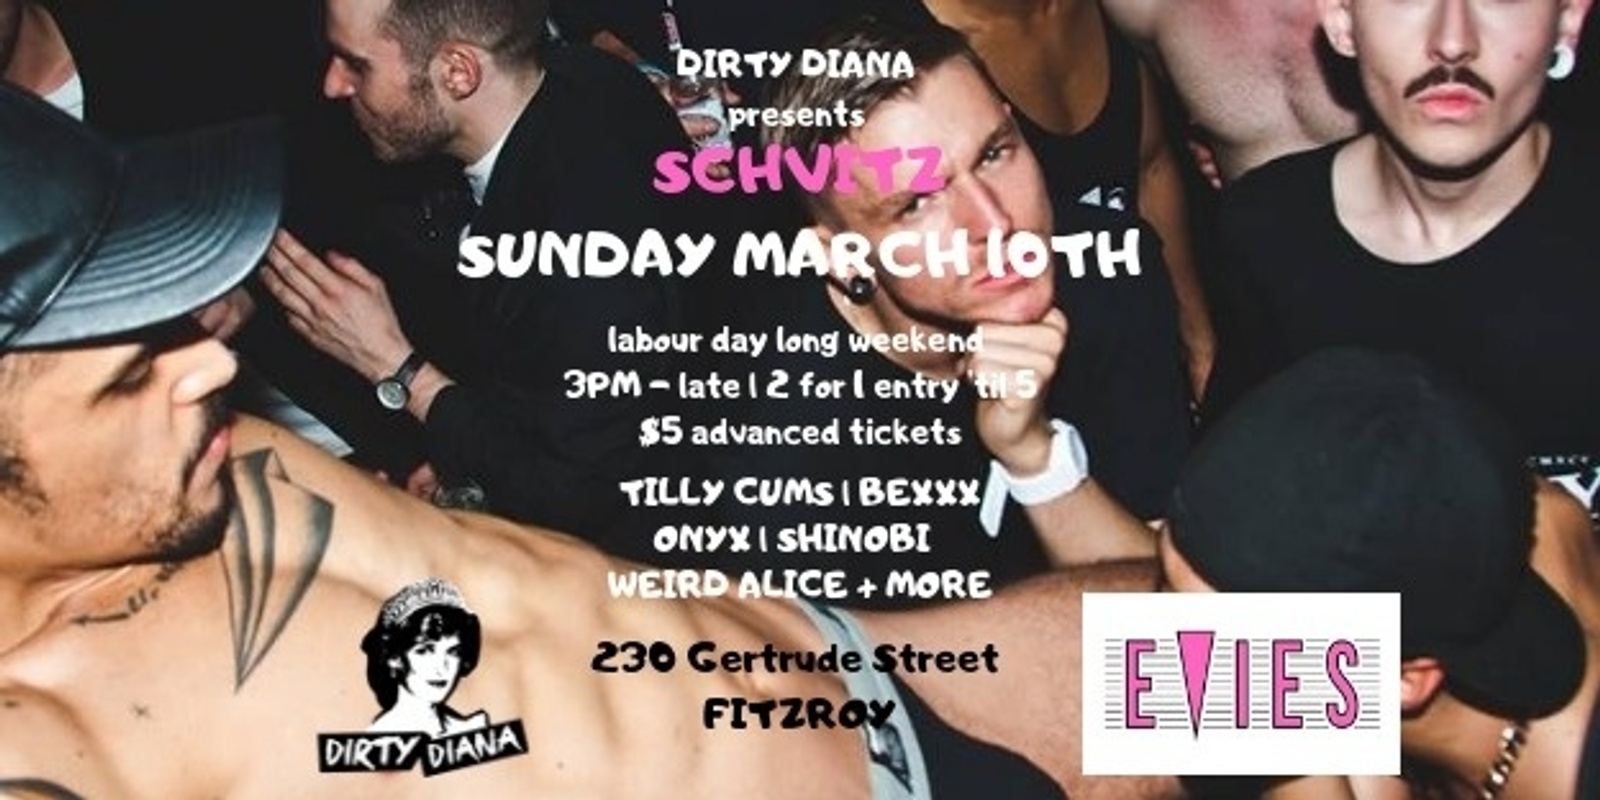 Banner image for DIRTY DIANA Presents Schvitz at Evie's 